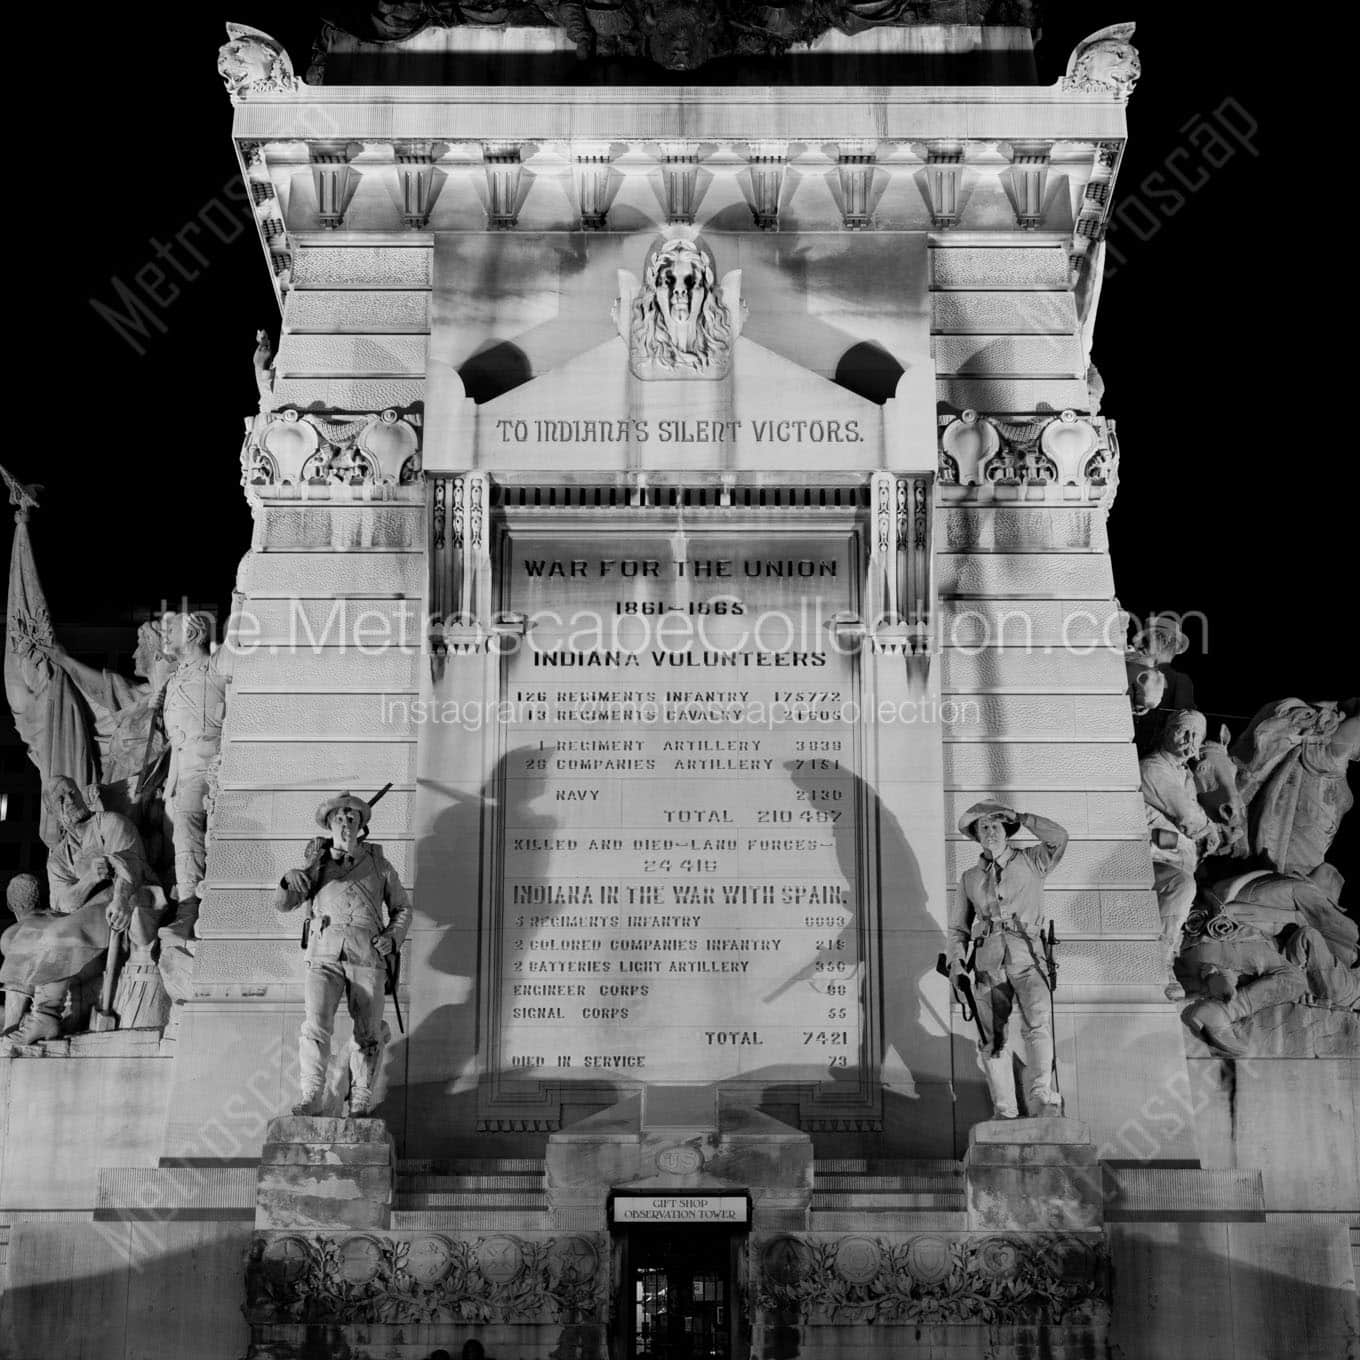 indy soldiers sailors monument Black & White Office Art